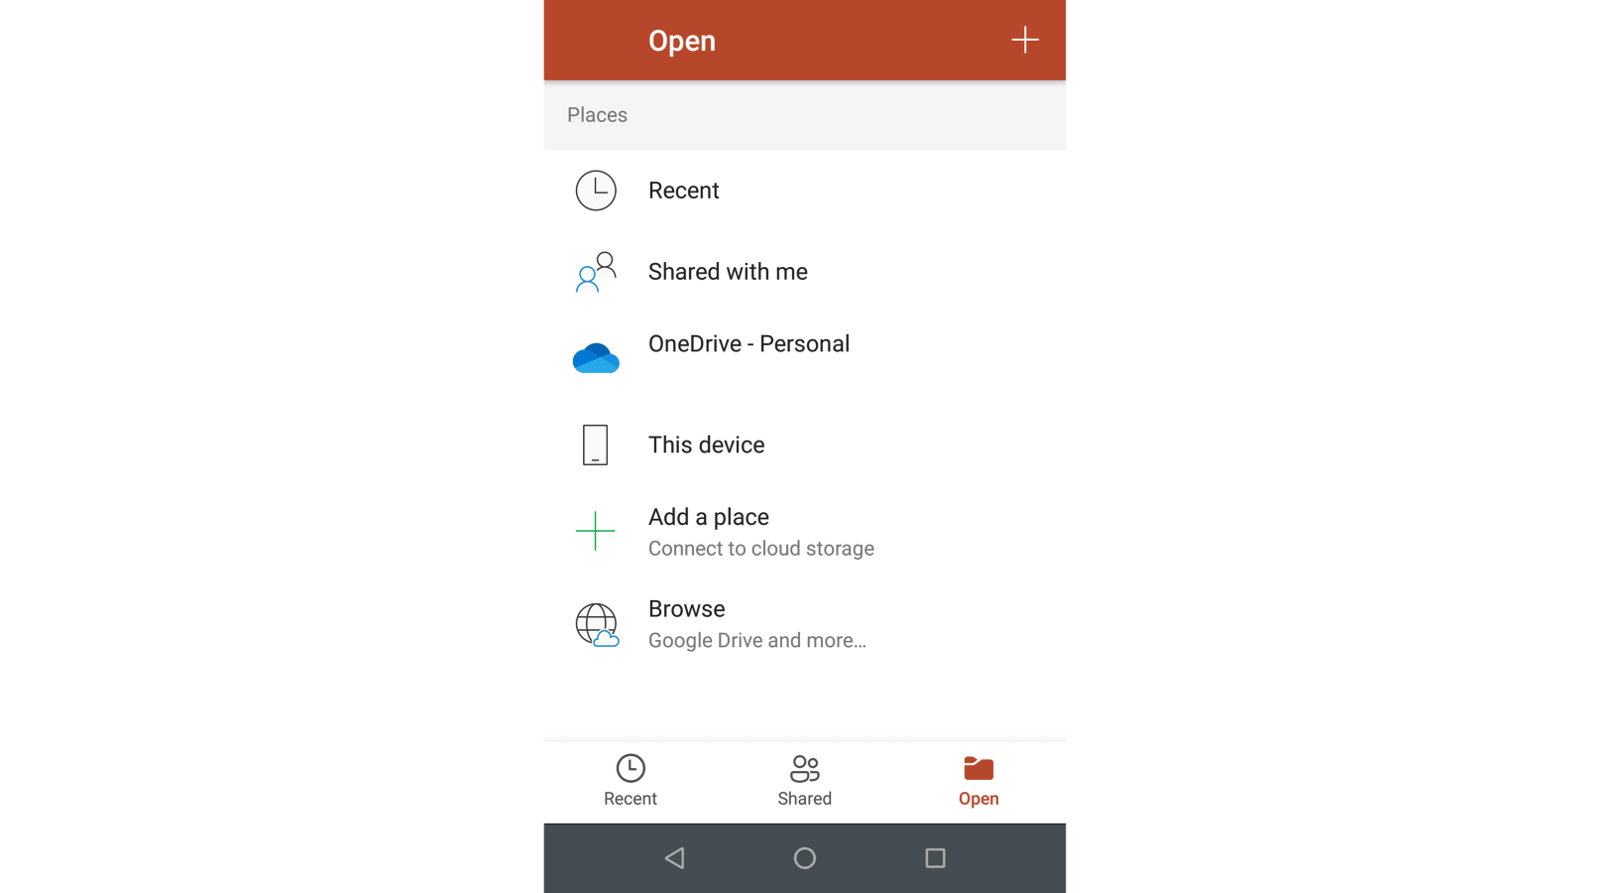 PowerPoint for Android Open presentation options